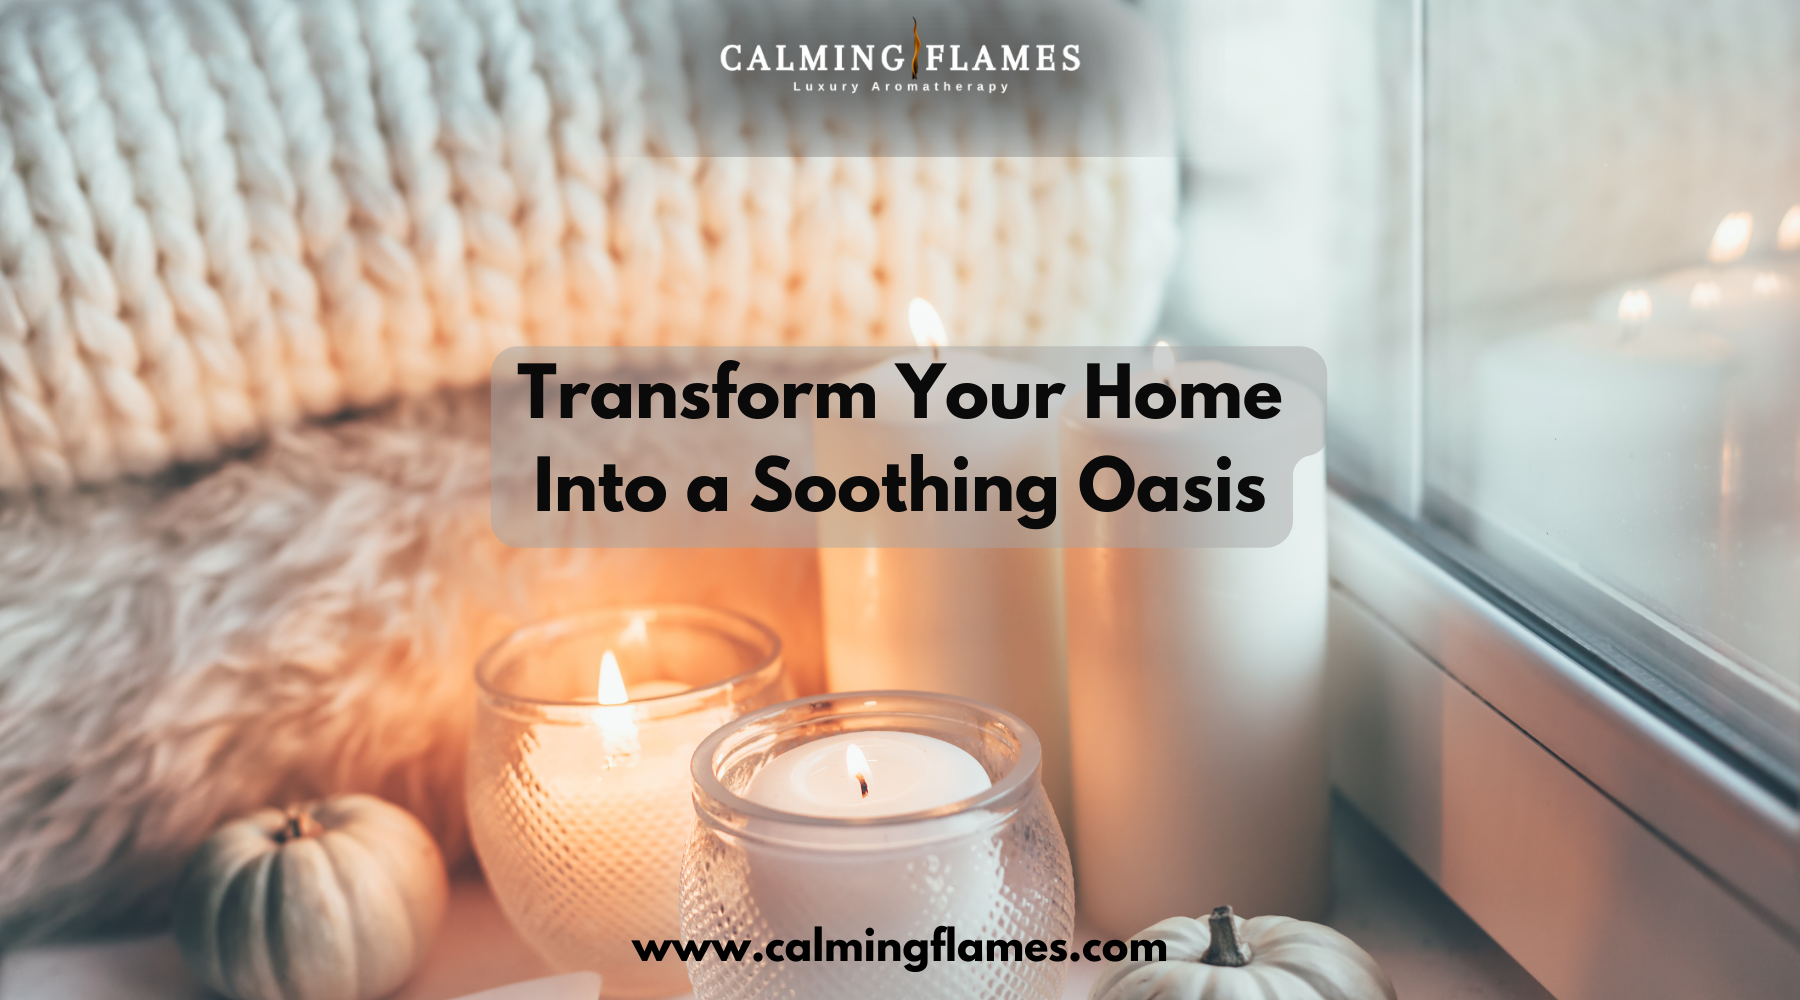 Transform Your Home Into a Soothing Oasis